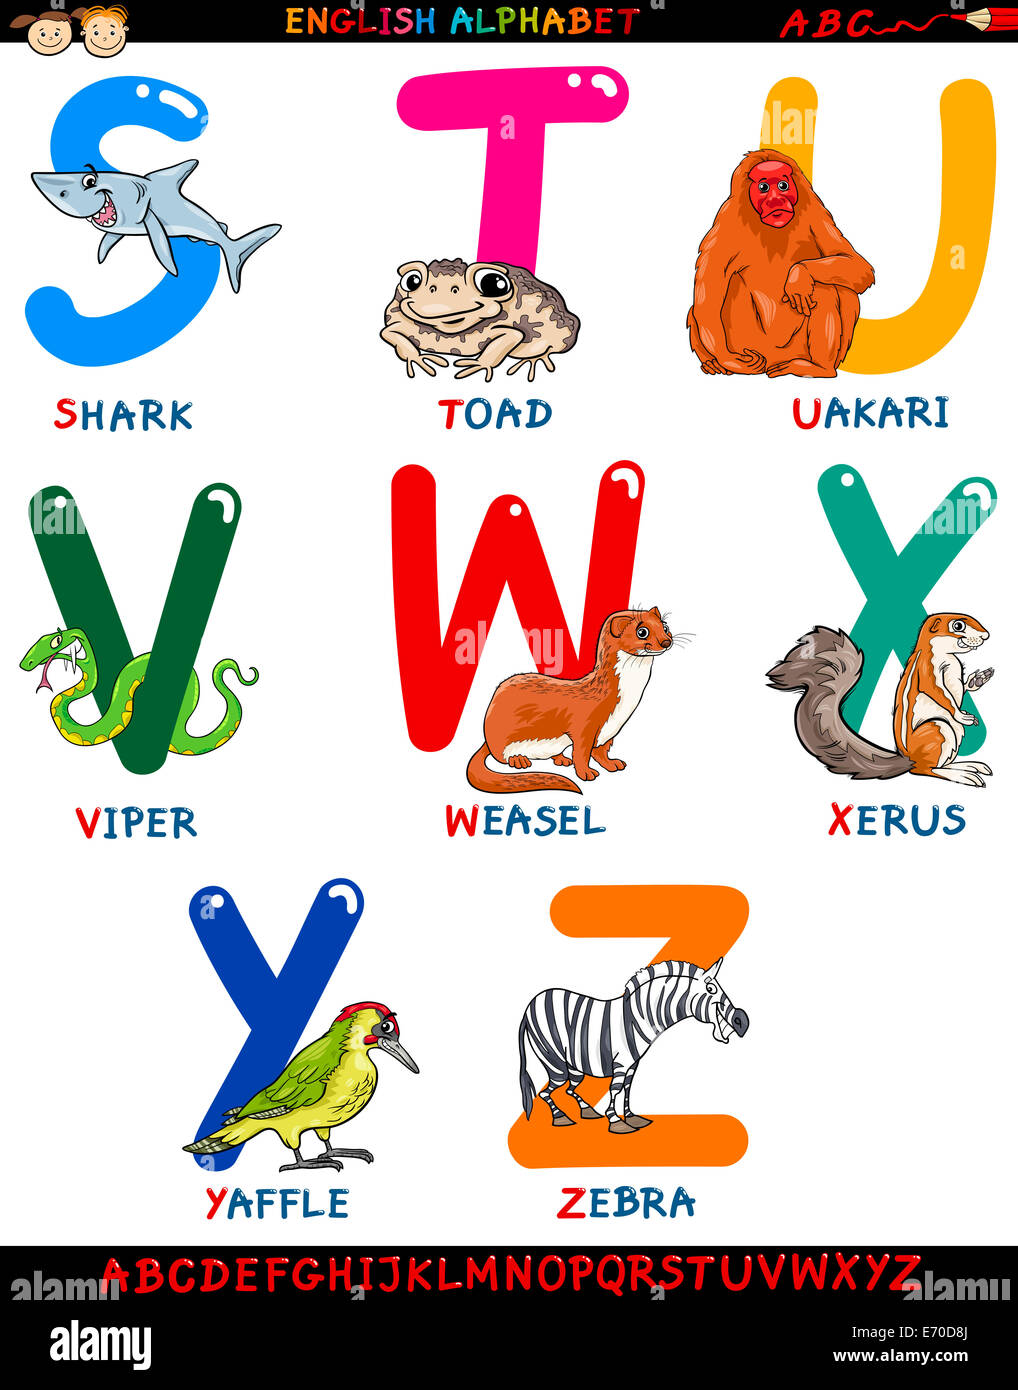 Cartoon Illustration of Colorful English Alphabet Set with Funny Animals from Letter S to Z Stock Photo